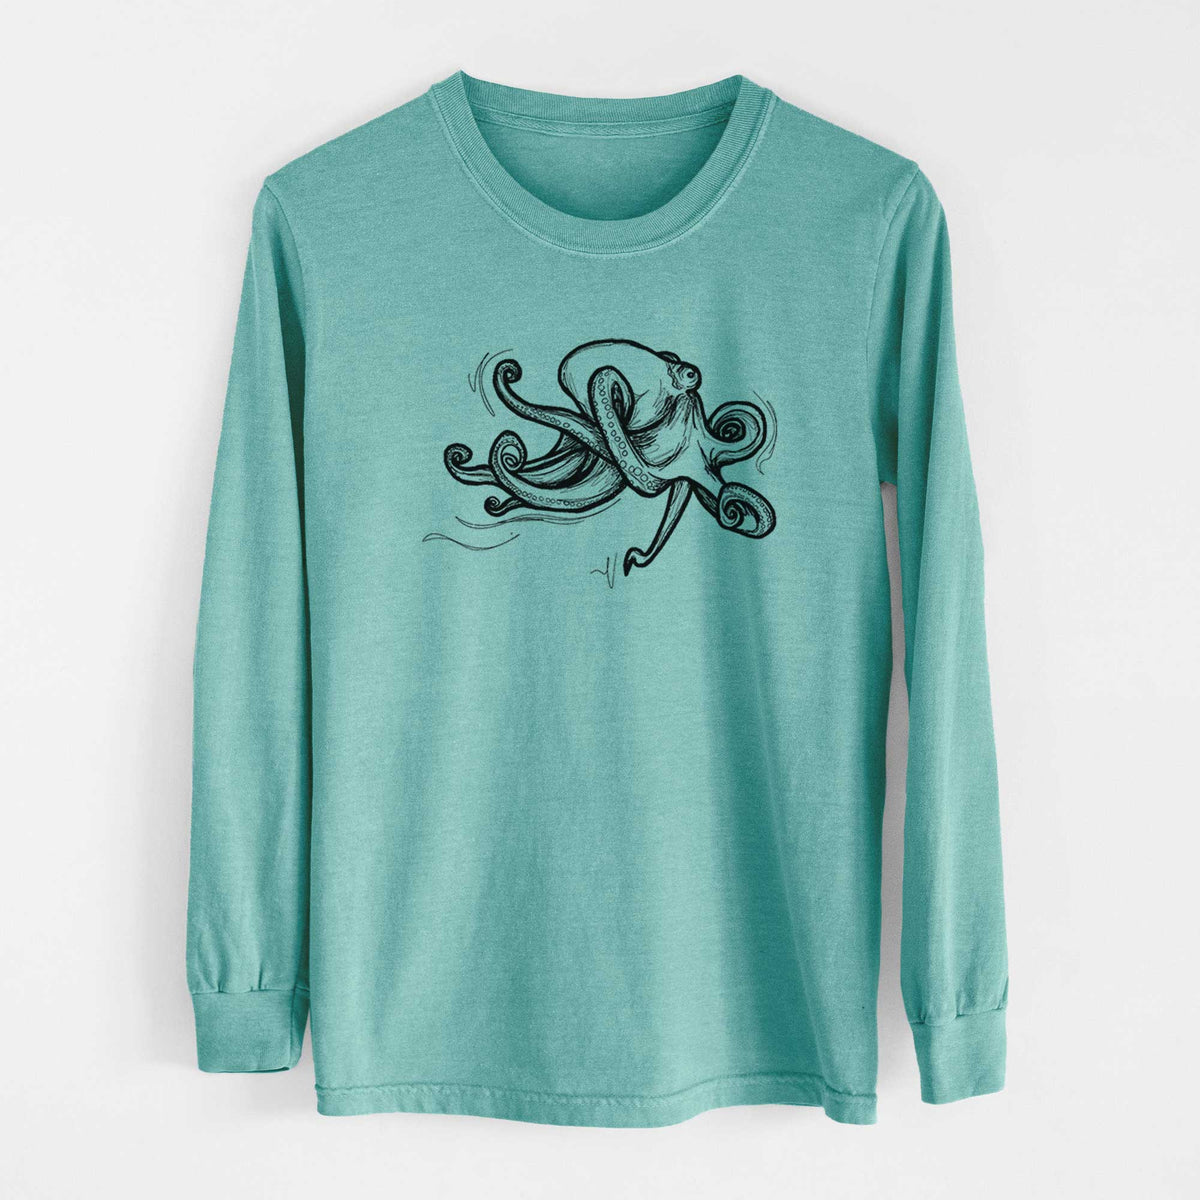 Giant Pacific Octopus - Heavyweight 100% Cotton Long Sleeve